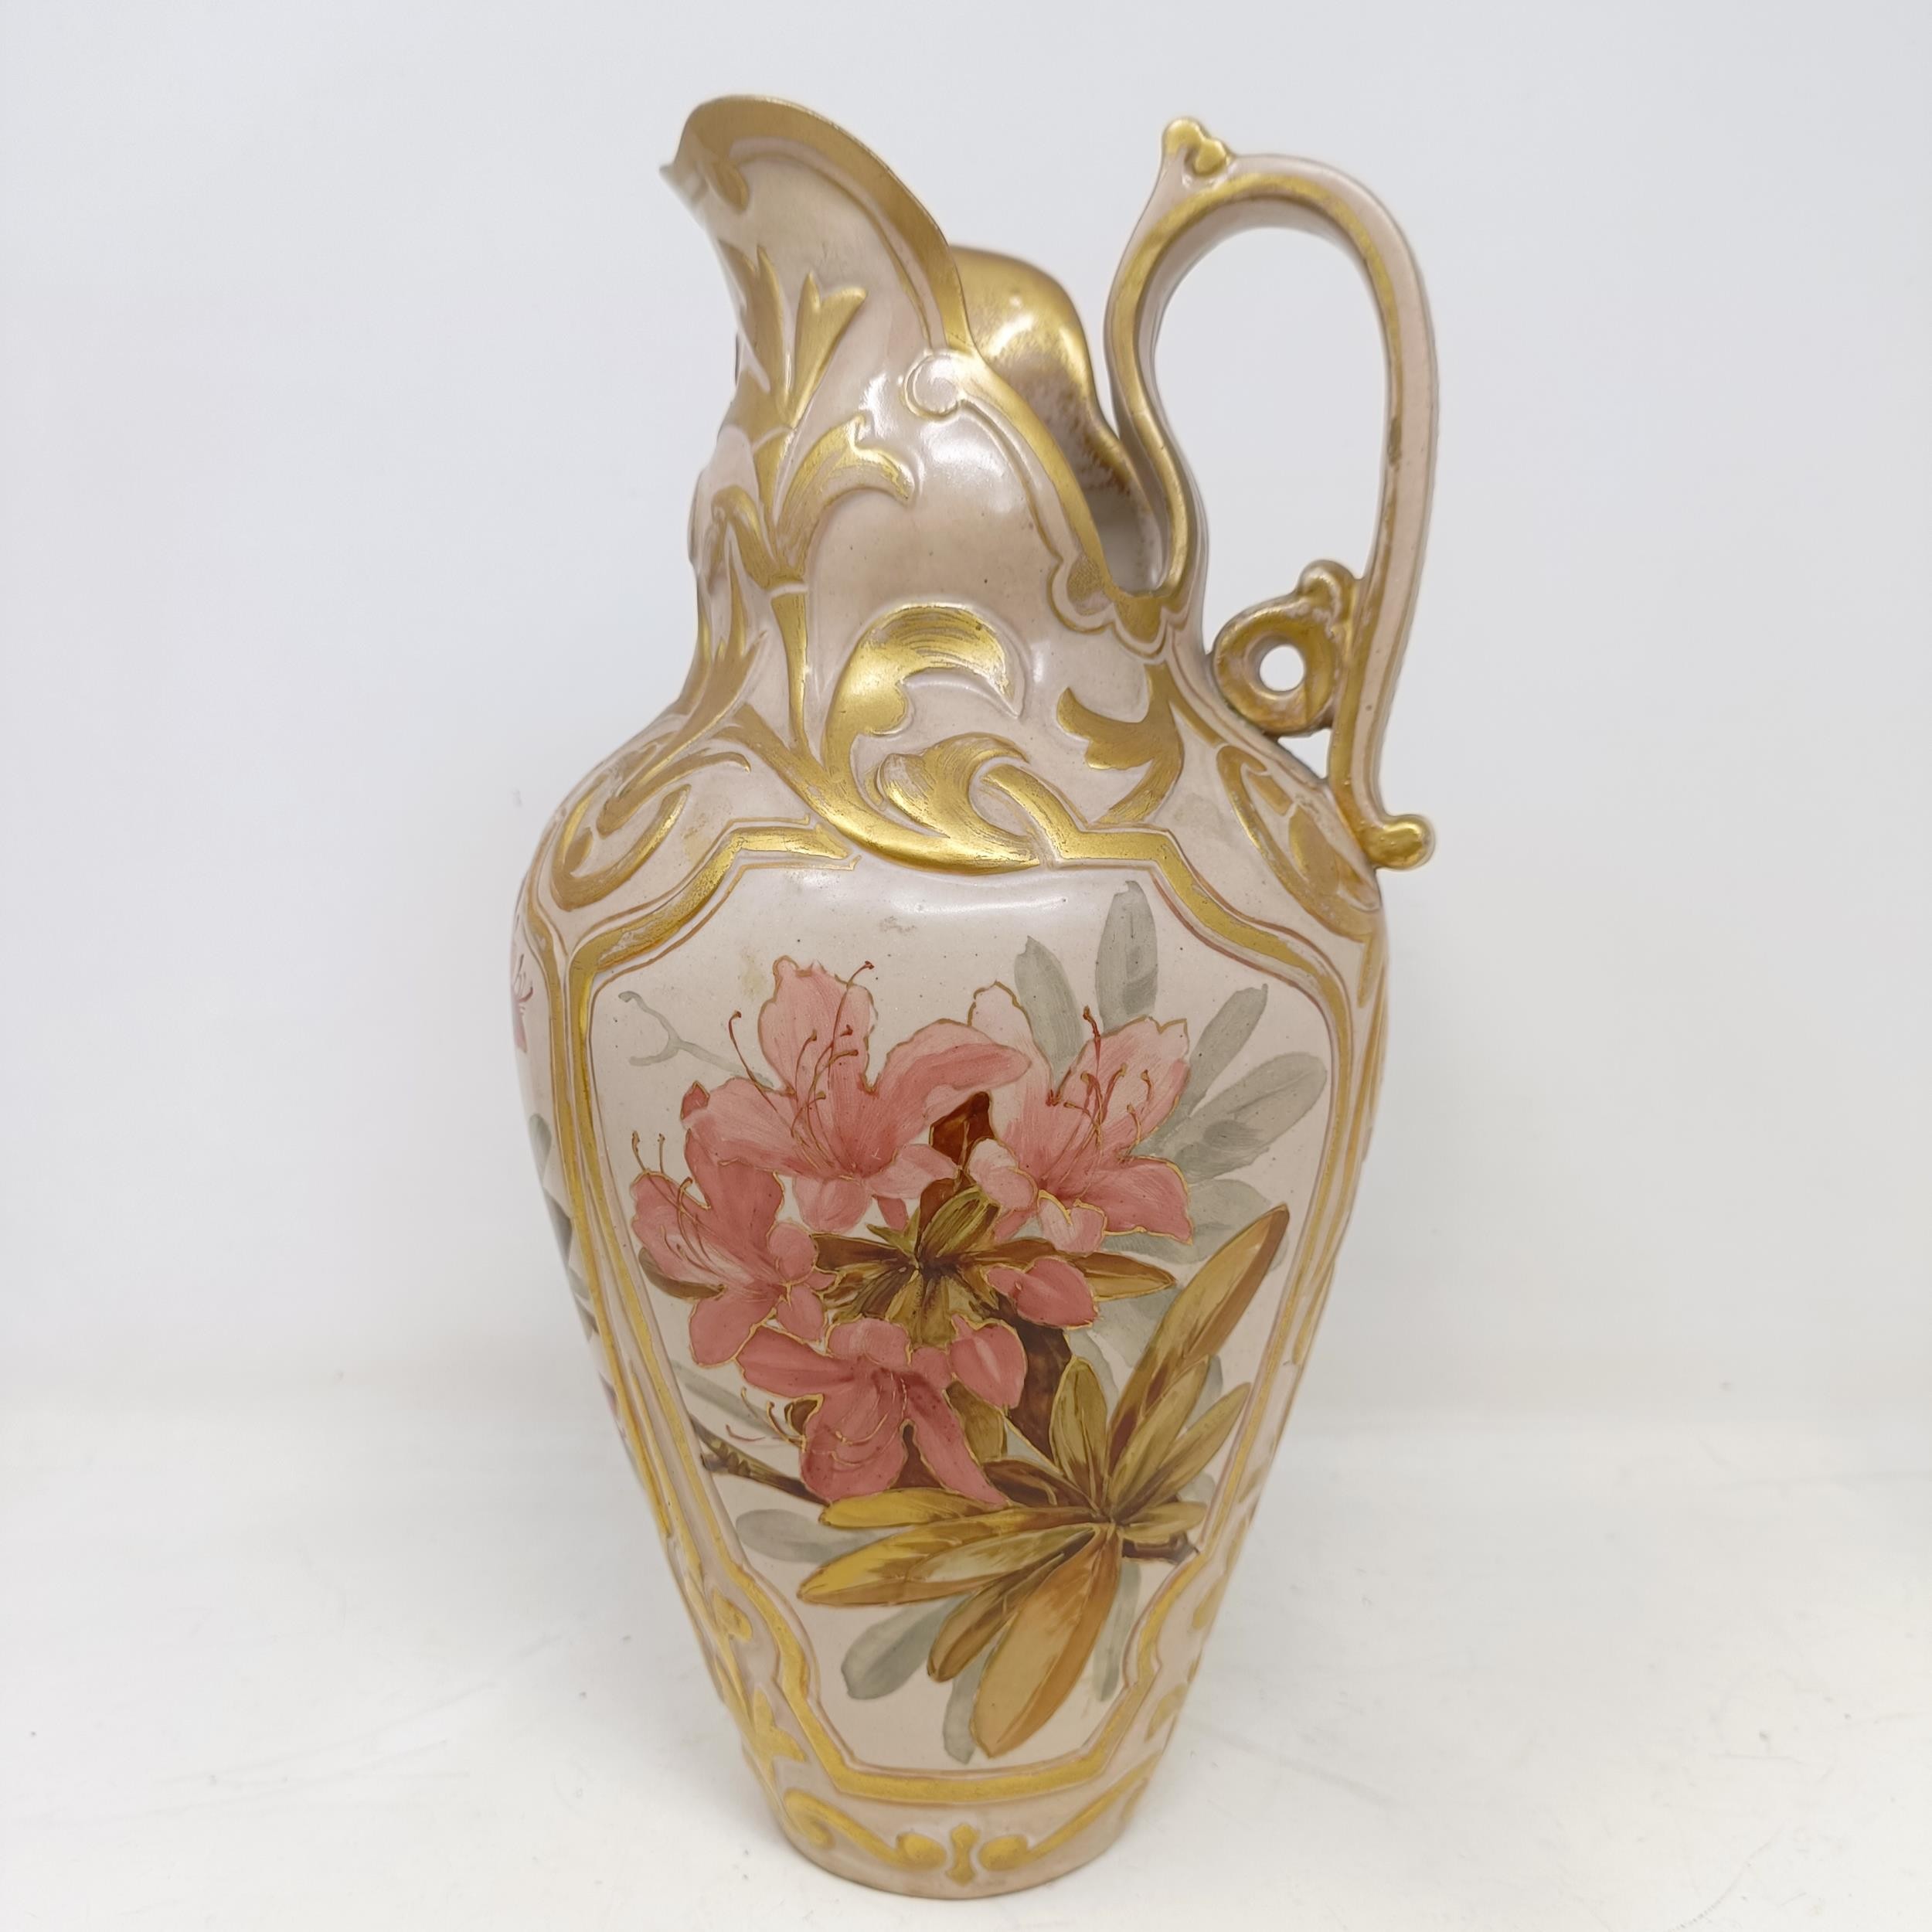 A Doulton Lambeth ewer, by Frank A Butler, decorated with flowers, highlighted in gilt, 30 cm high - Image 2 of 7